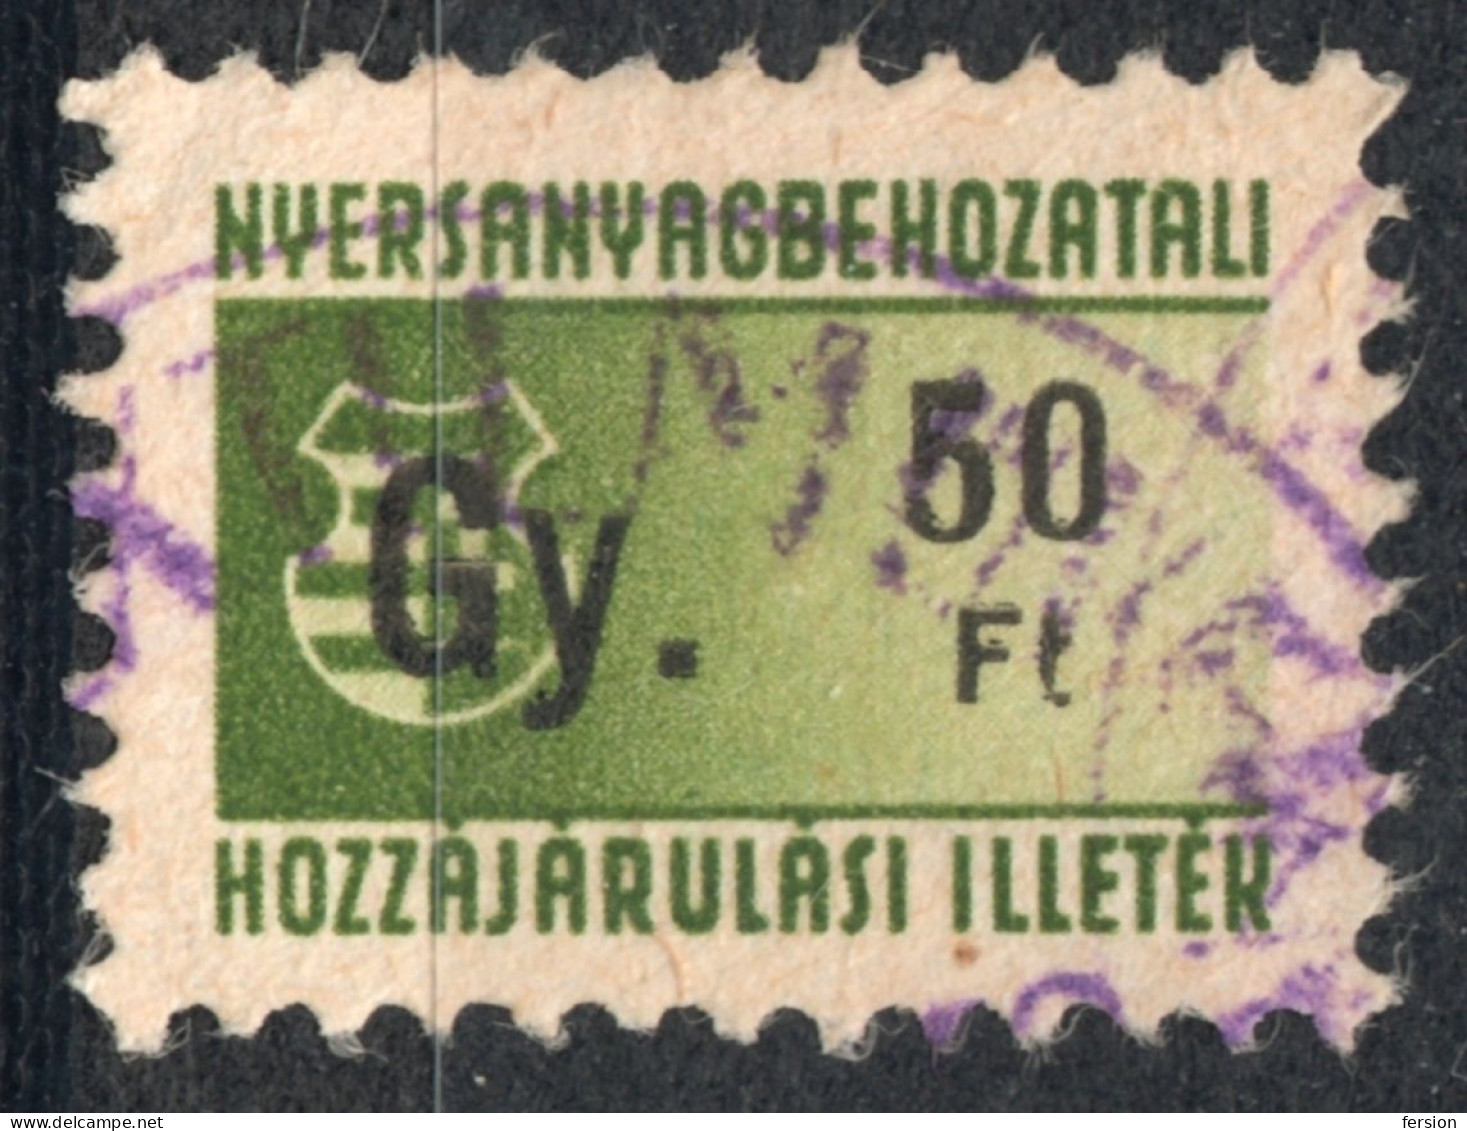 1948 Hungary - Wool Import Tax -  FISCAL BILL - Revenue Stamp - 50 Ft - Used - RR! - KOSSUTH Coat Of Arms - Steuermarken